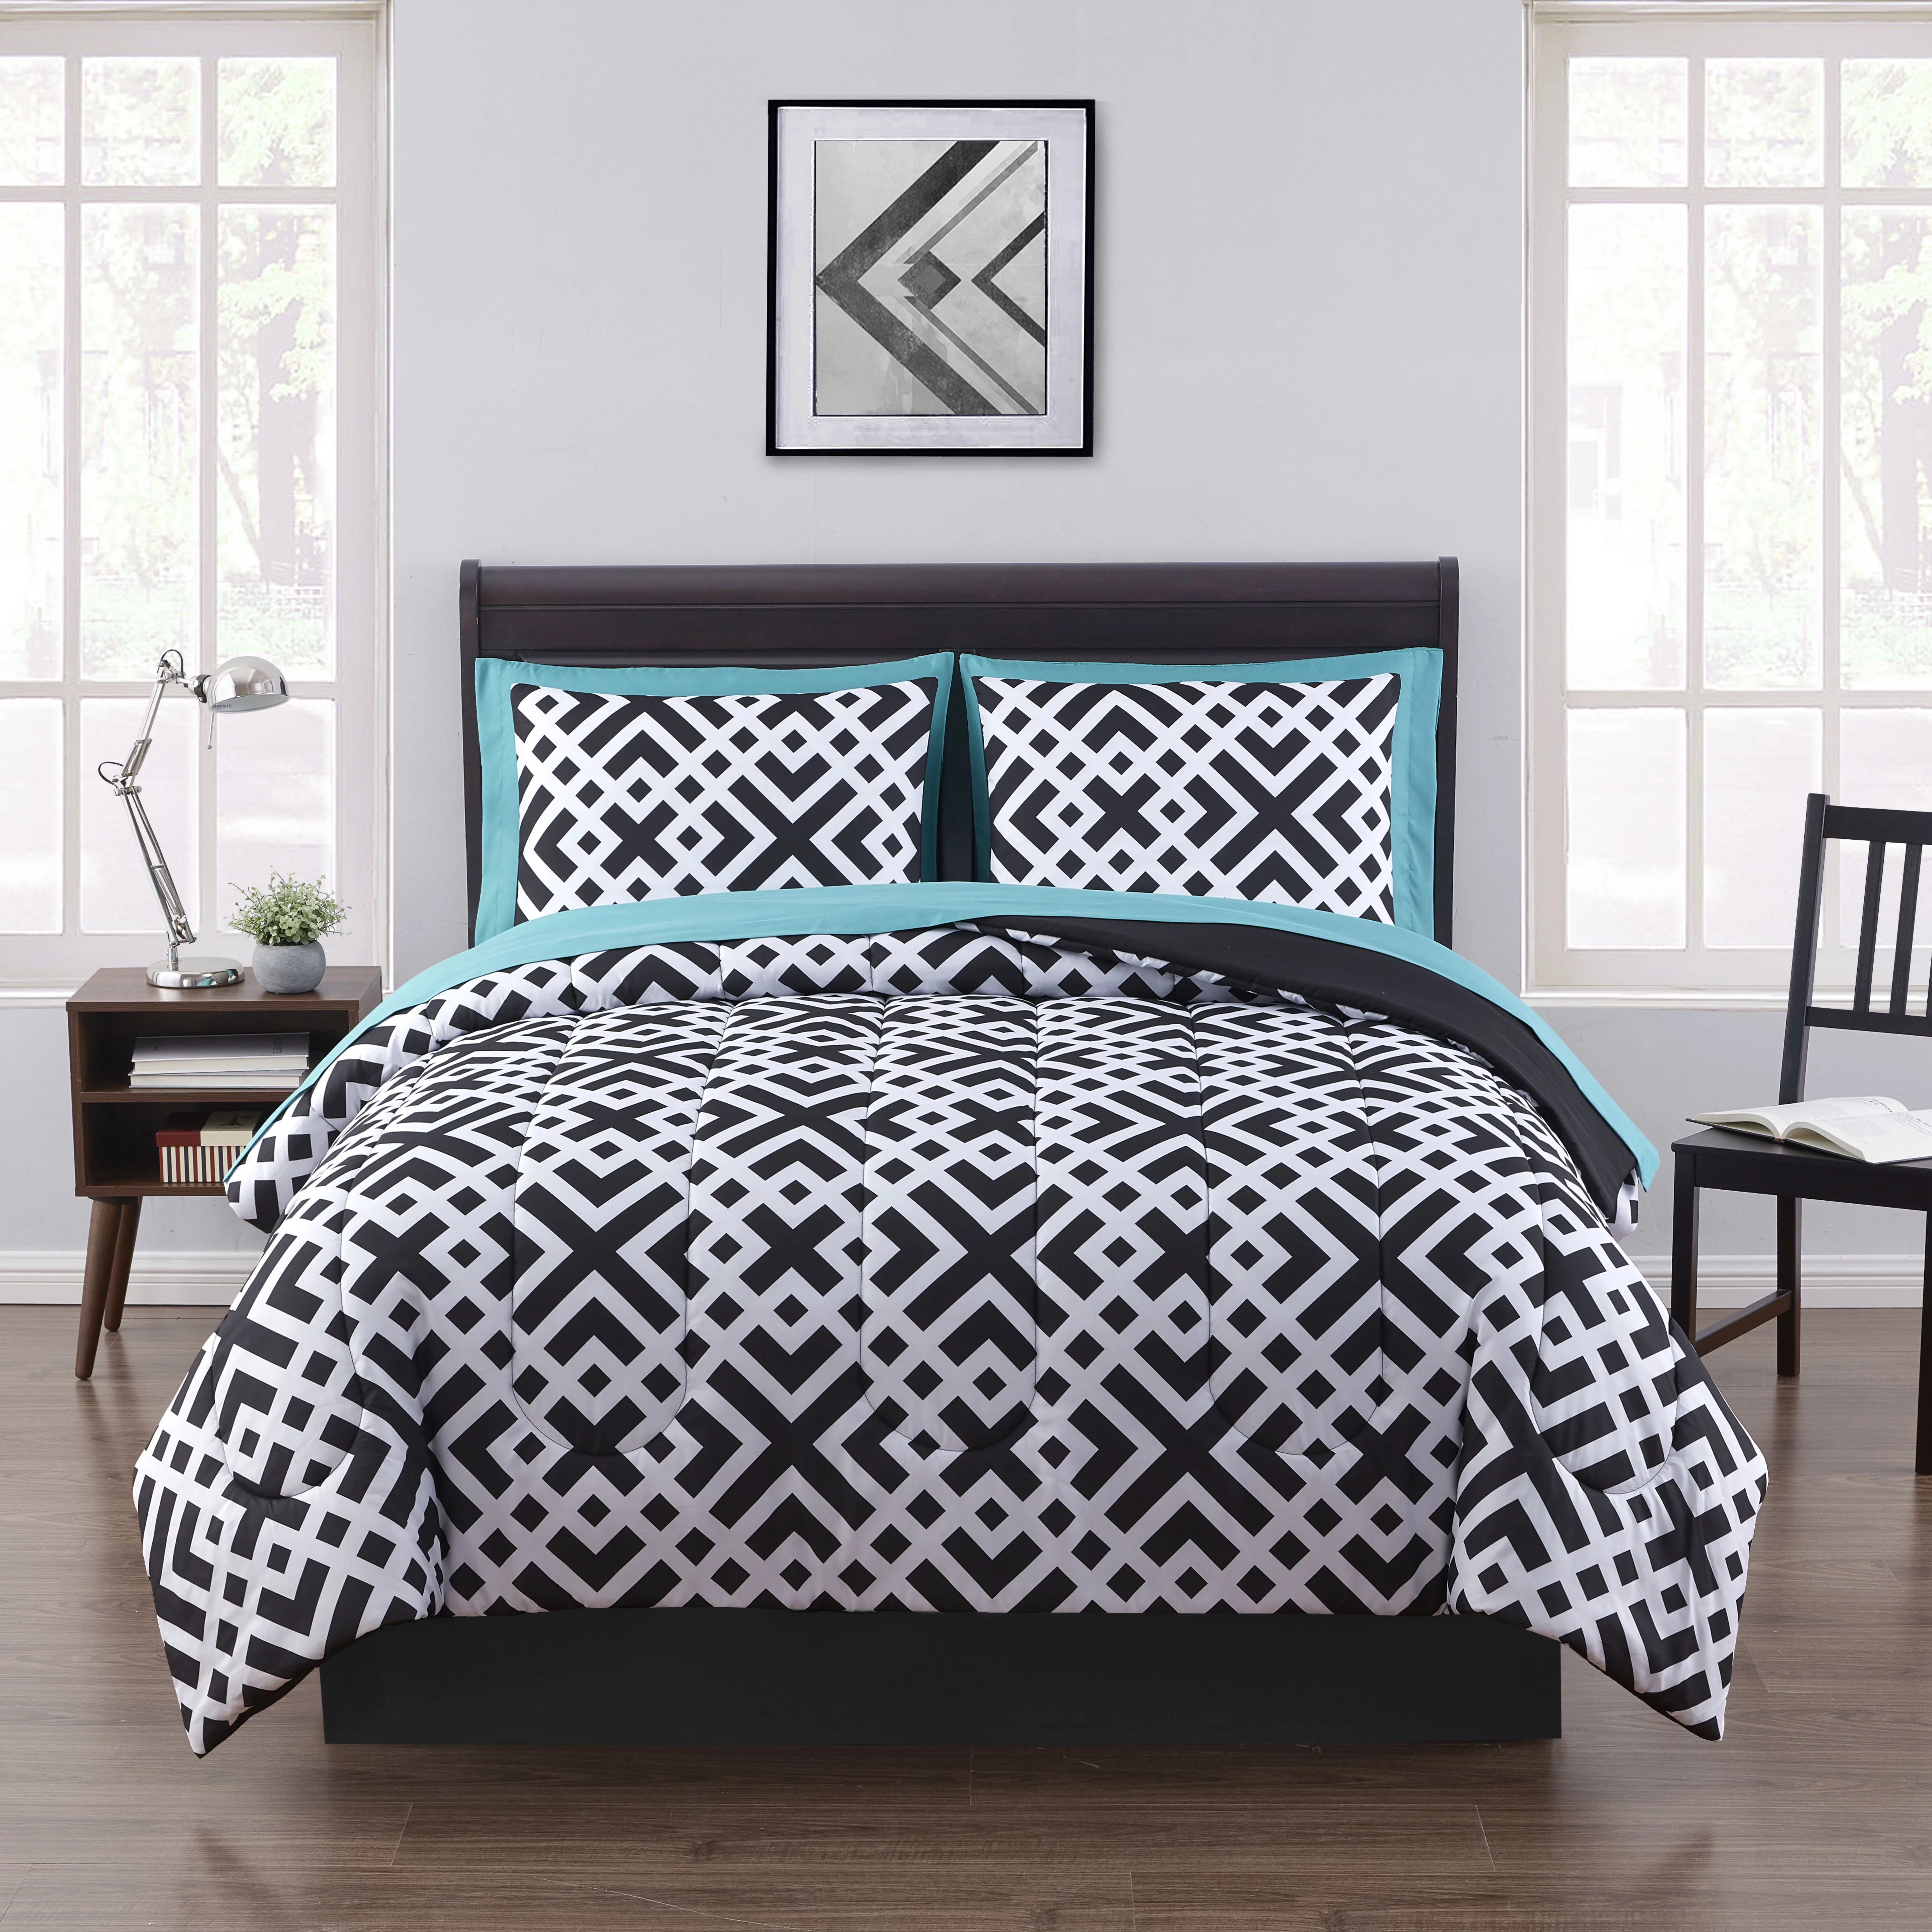 Mainstays Black Geometric 8 Piece Bed in a Bag Comforter Set With Sheets, King